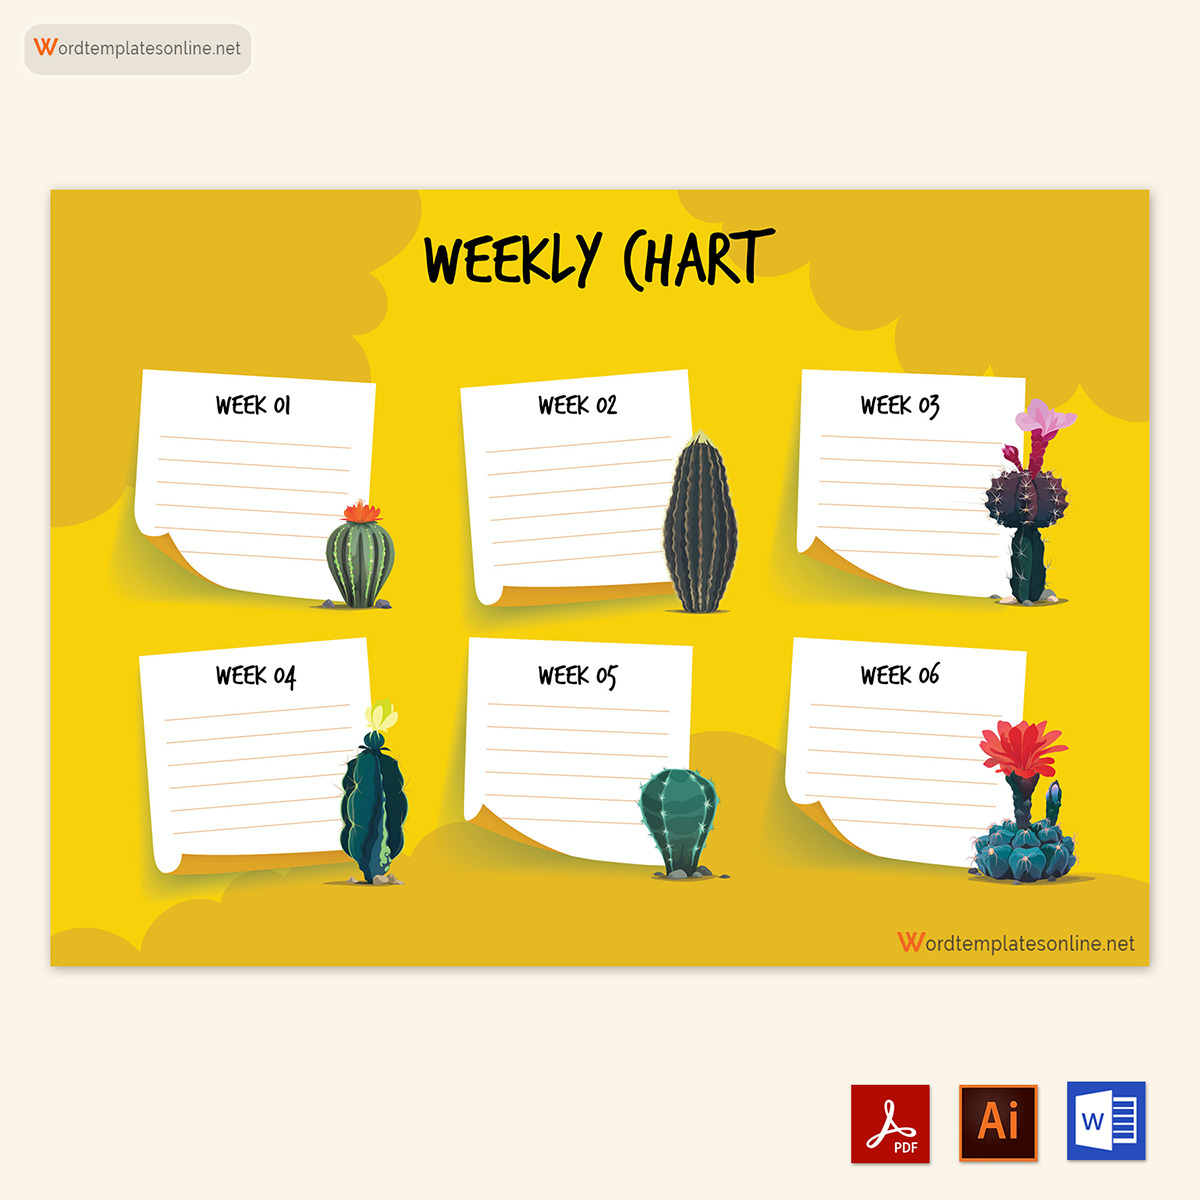 Great Customizable Weekly Coloring Chart for Kids Sample 01 for Word and Adobe File